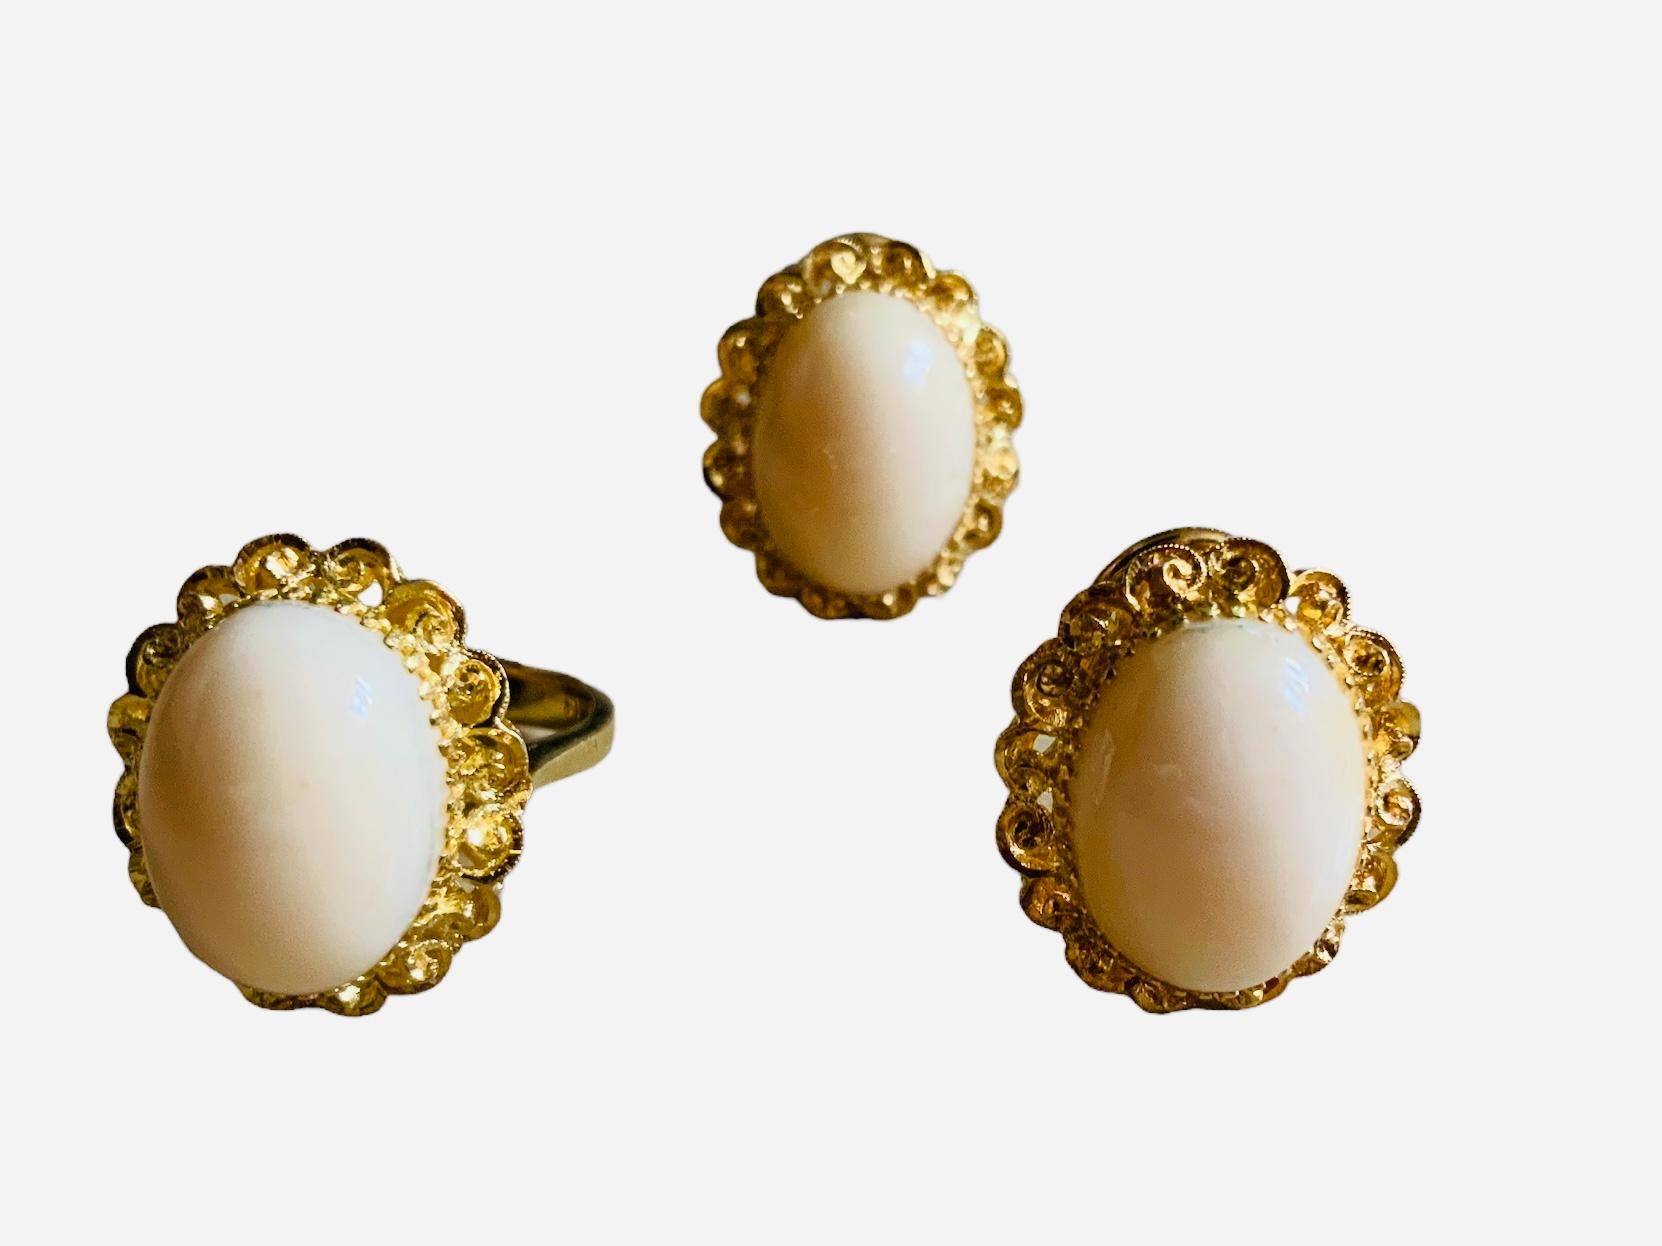 This is a White Coral Set of earrings and ring. It depicts three cabochon oval shaped white corals ( approximately 16 x 12 mm ) mounted in 18K yellow gold shaped as flowers petals earrings and ring for a total weight of 22.4 grams. The earrings have